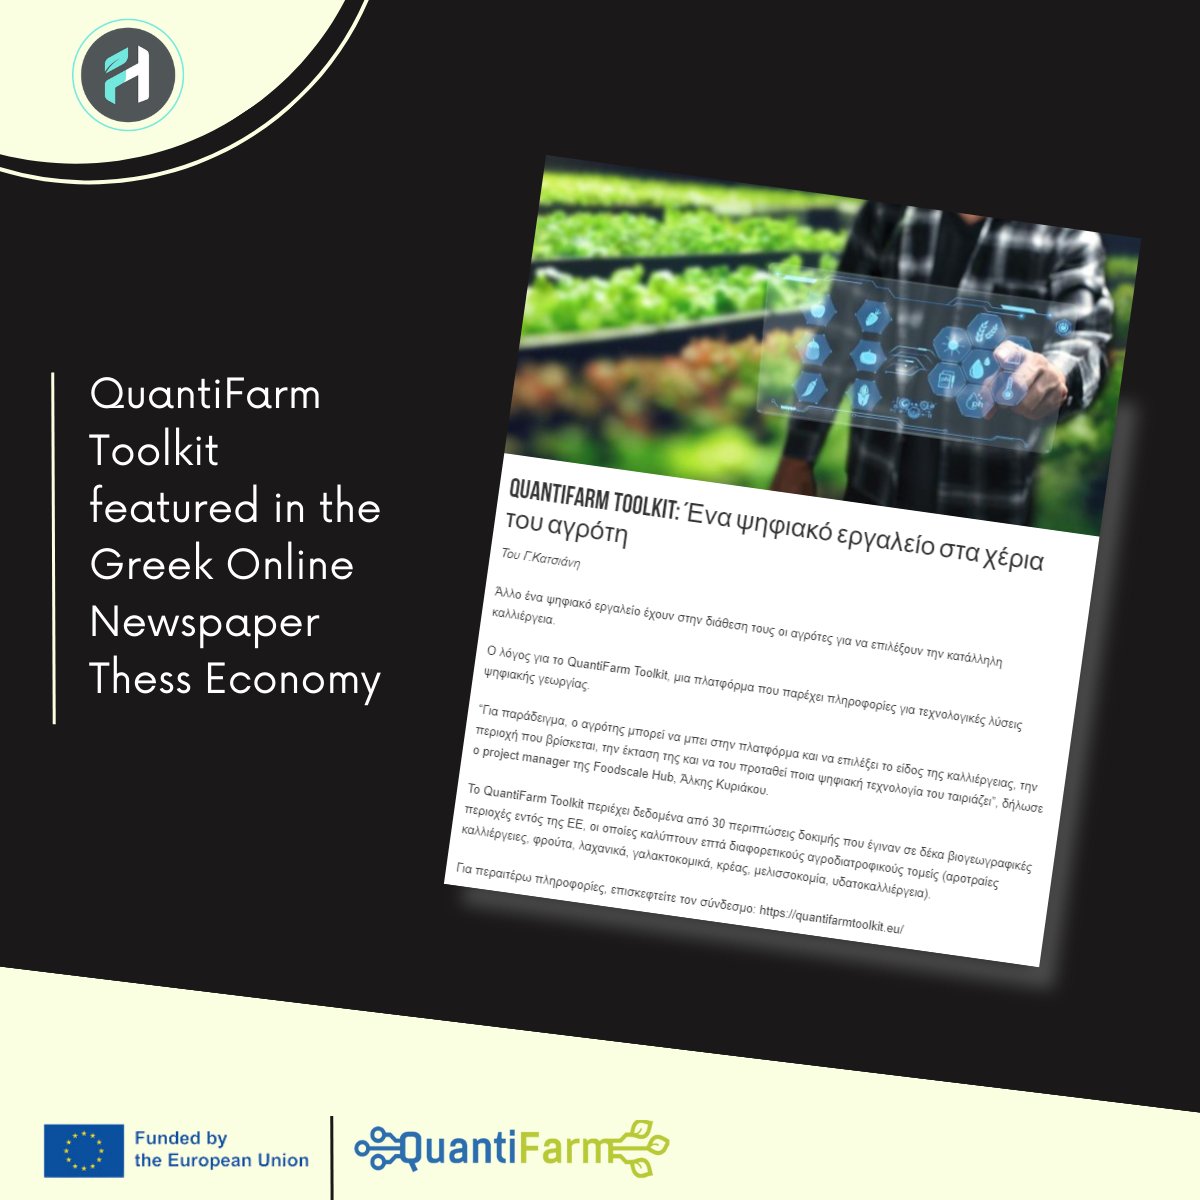 📌𝐓𝐡𝐞 𝐮𝐩𝐝𝐚𝐭𝐞𝐬 𝐜𝐨𝐧𝐭𝐢𝐧𝐮𝐞: Our innovative Toolkit was featured in the Greek online newspaper 𝐓𝐡𝐞𝐬𝐬 𝐄𝐜𝐨𝐧𝐨𝐦𝐲, in an article authored by the journalist George Katsianis! 🔗Find the whole article here [Greek]: bit.ly/4aKaATL #digitalfarming